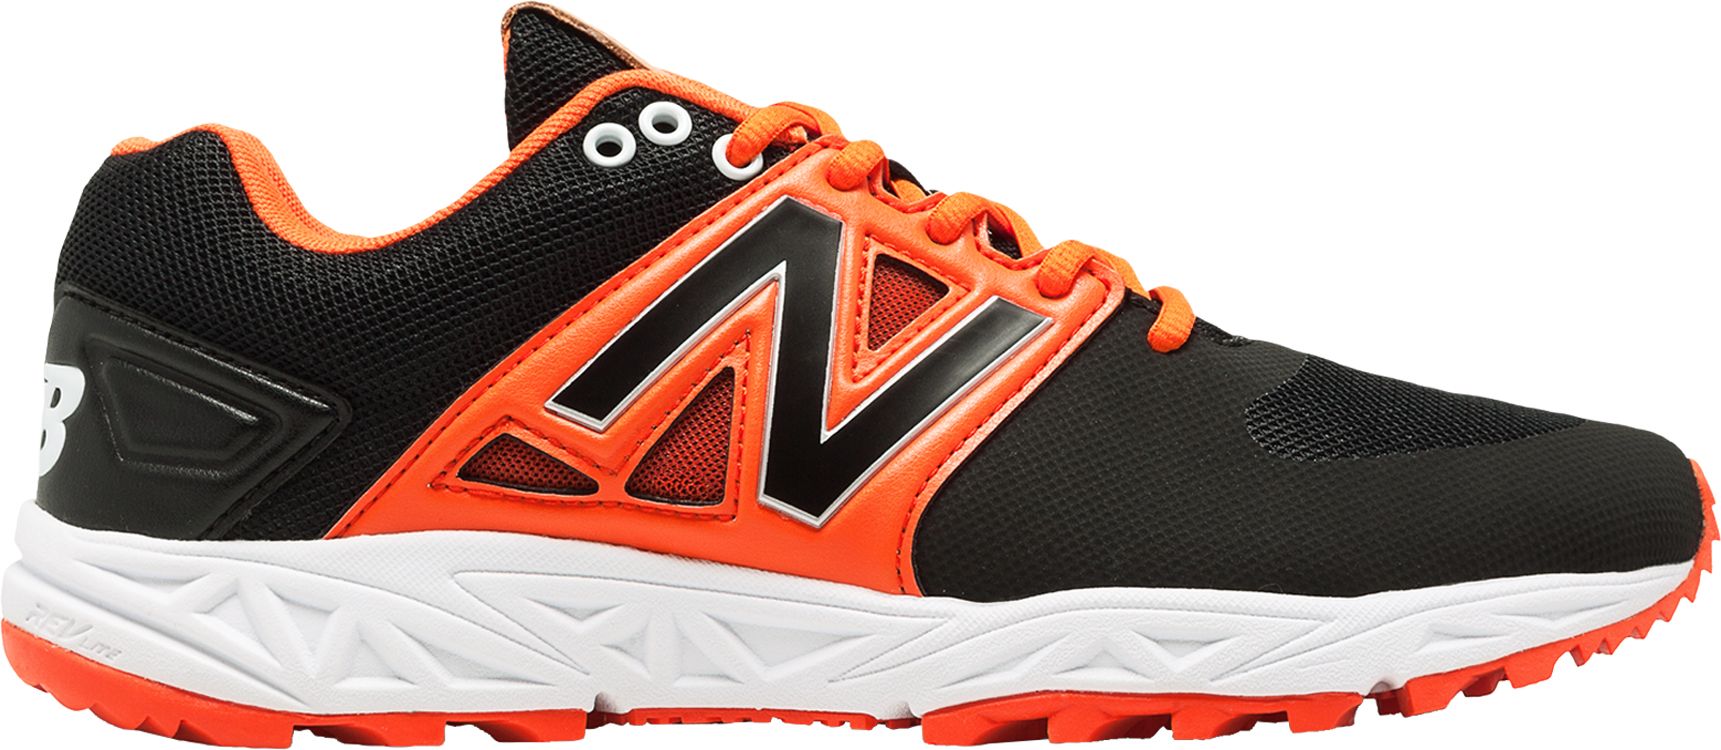 New Balance Shoes | DICK'S Sporting Goods